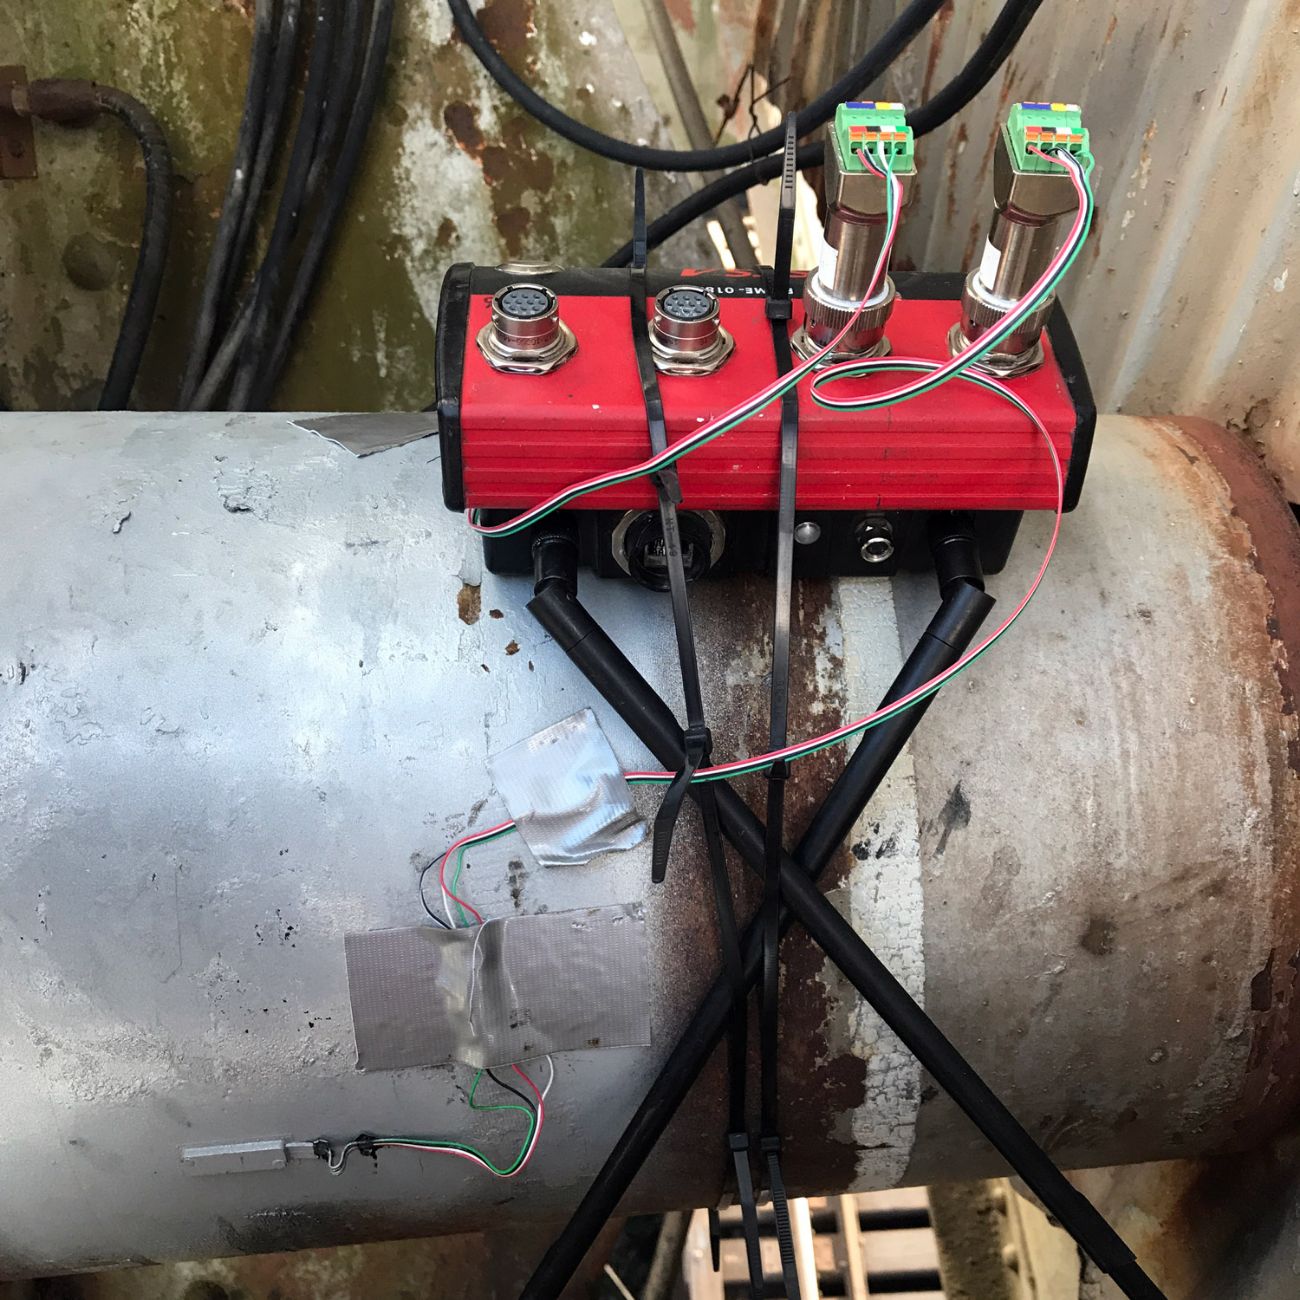 BDI STS4-4-IW3 intelliducer data acquisition node for structural testing installed on a pipe with terminal connectors plugged in.